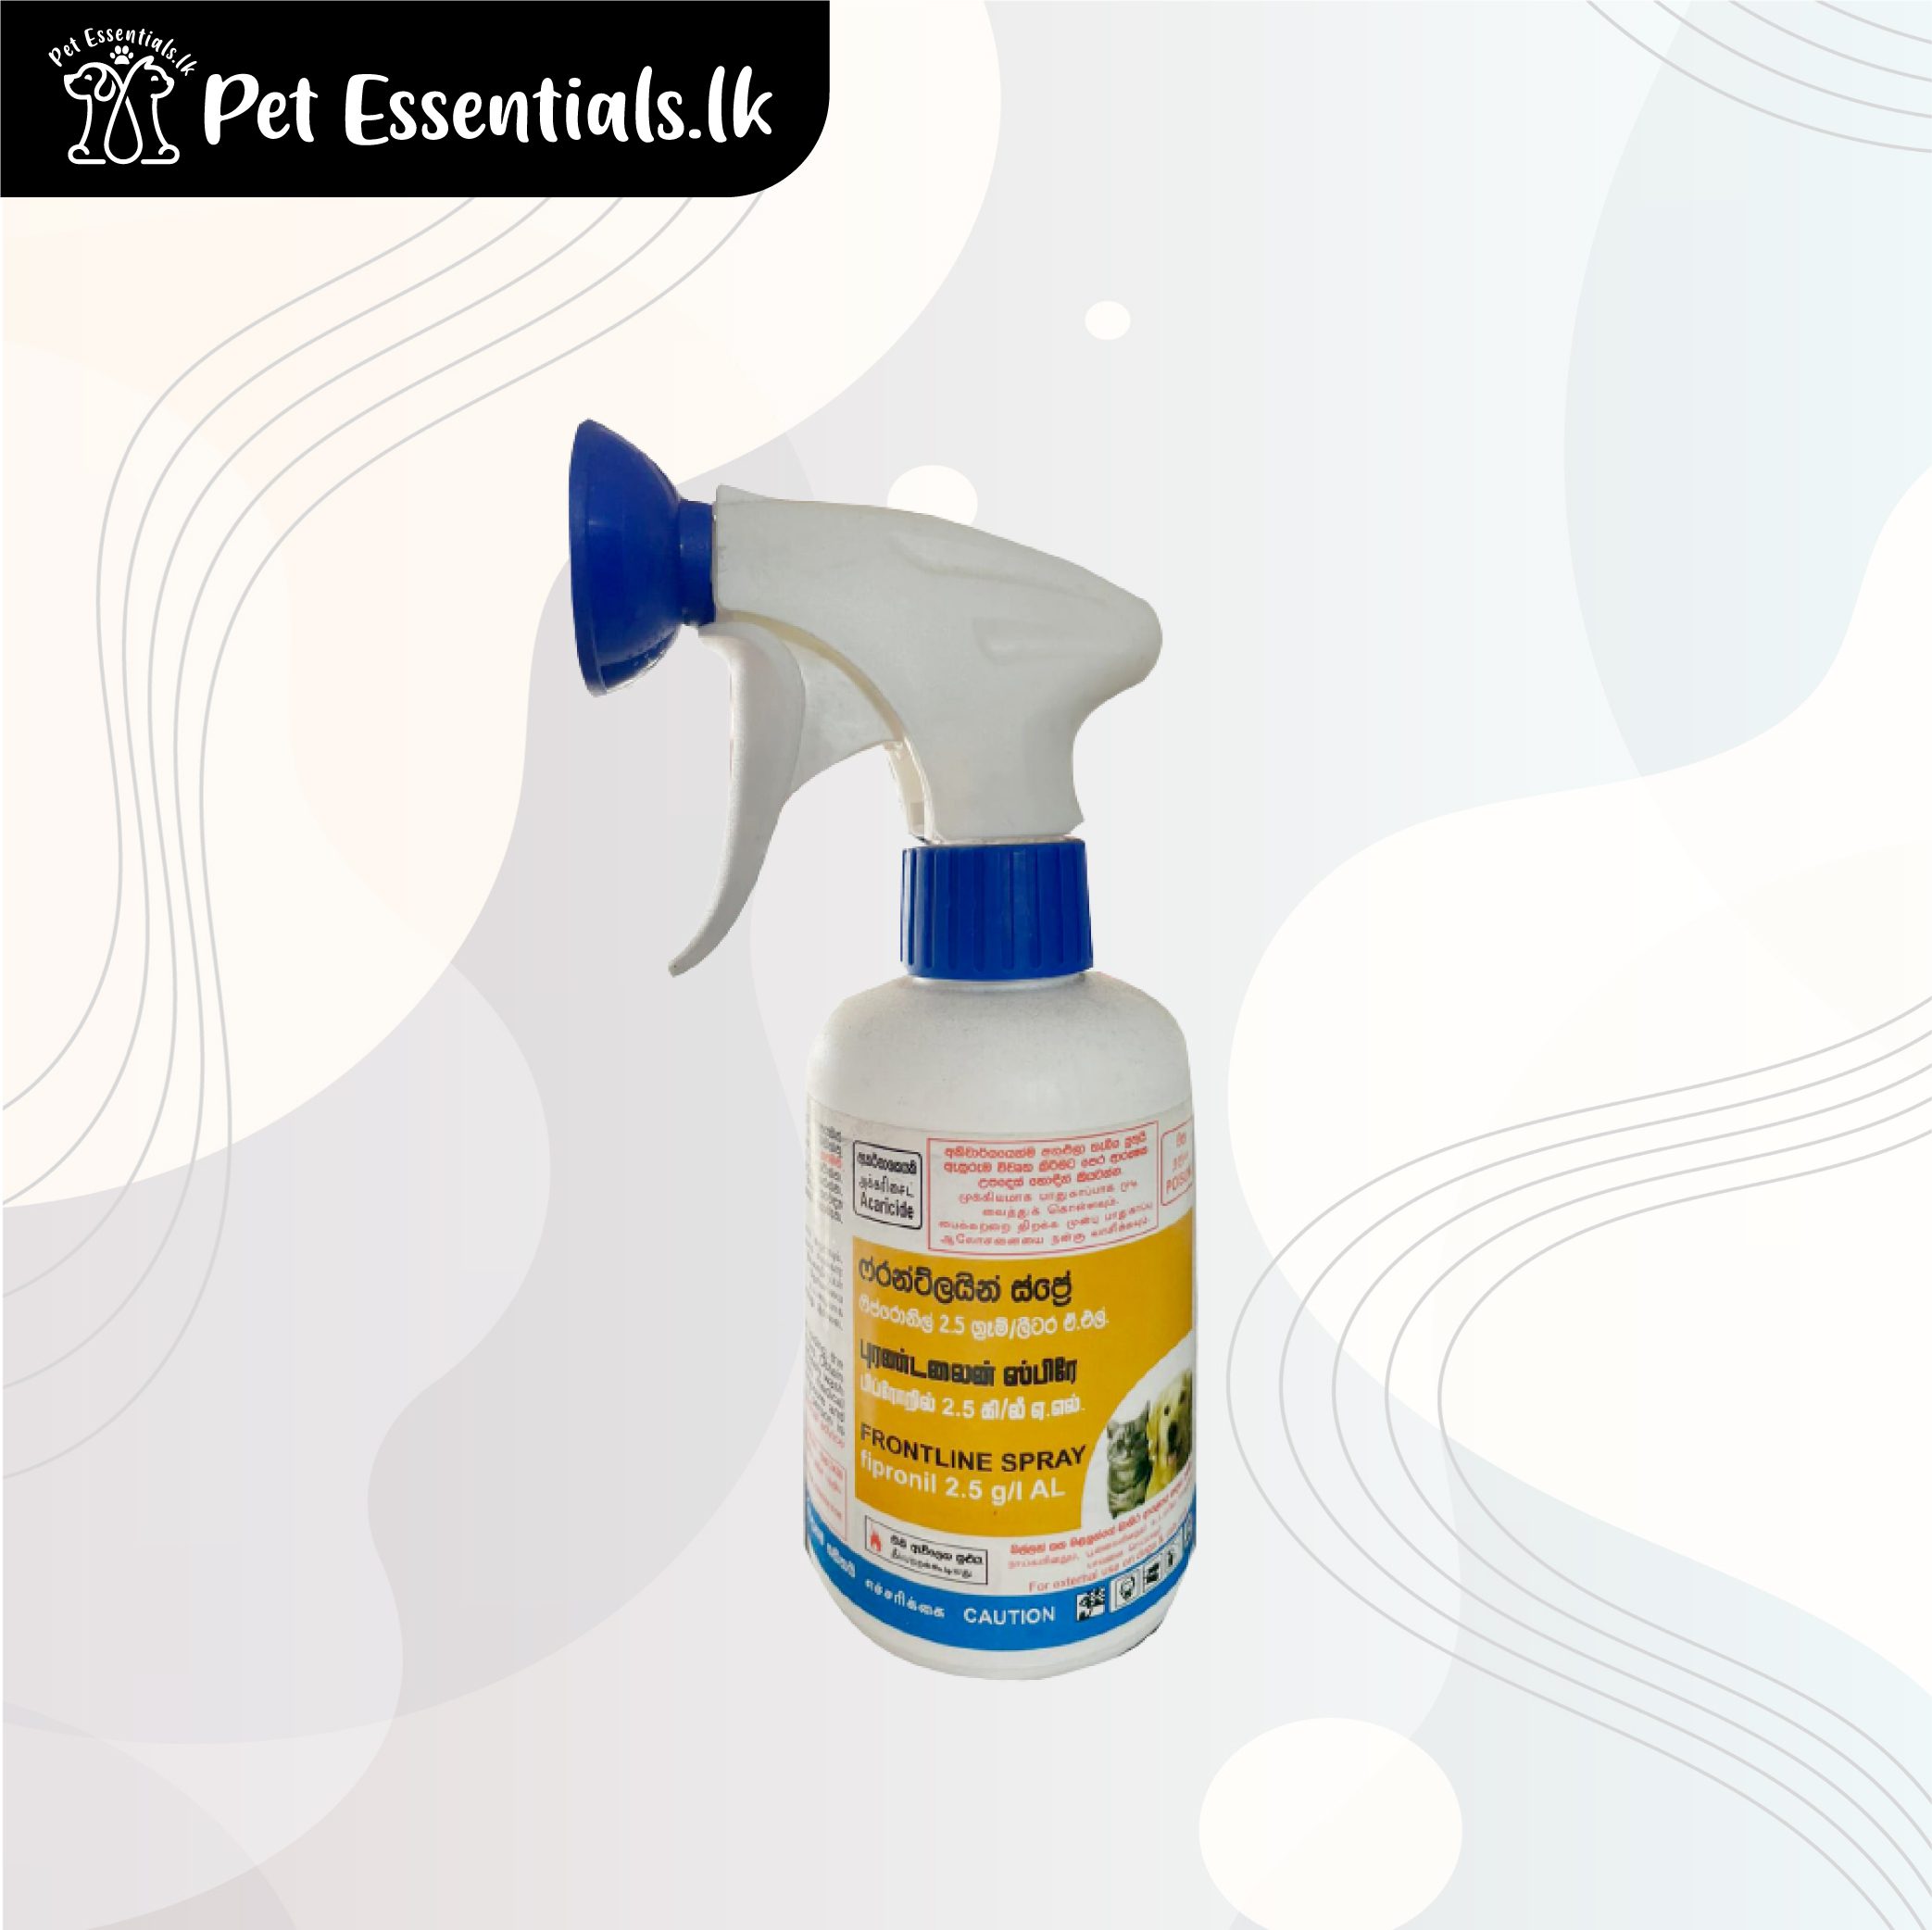 FRONTLINE Spray  Flea and tick spray for cats and dogs